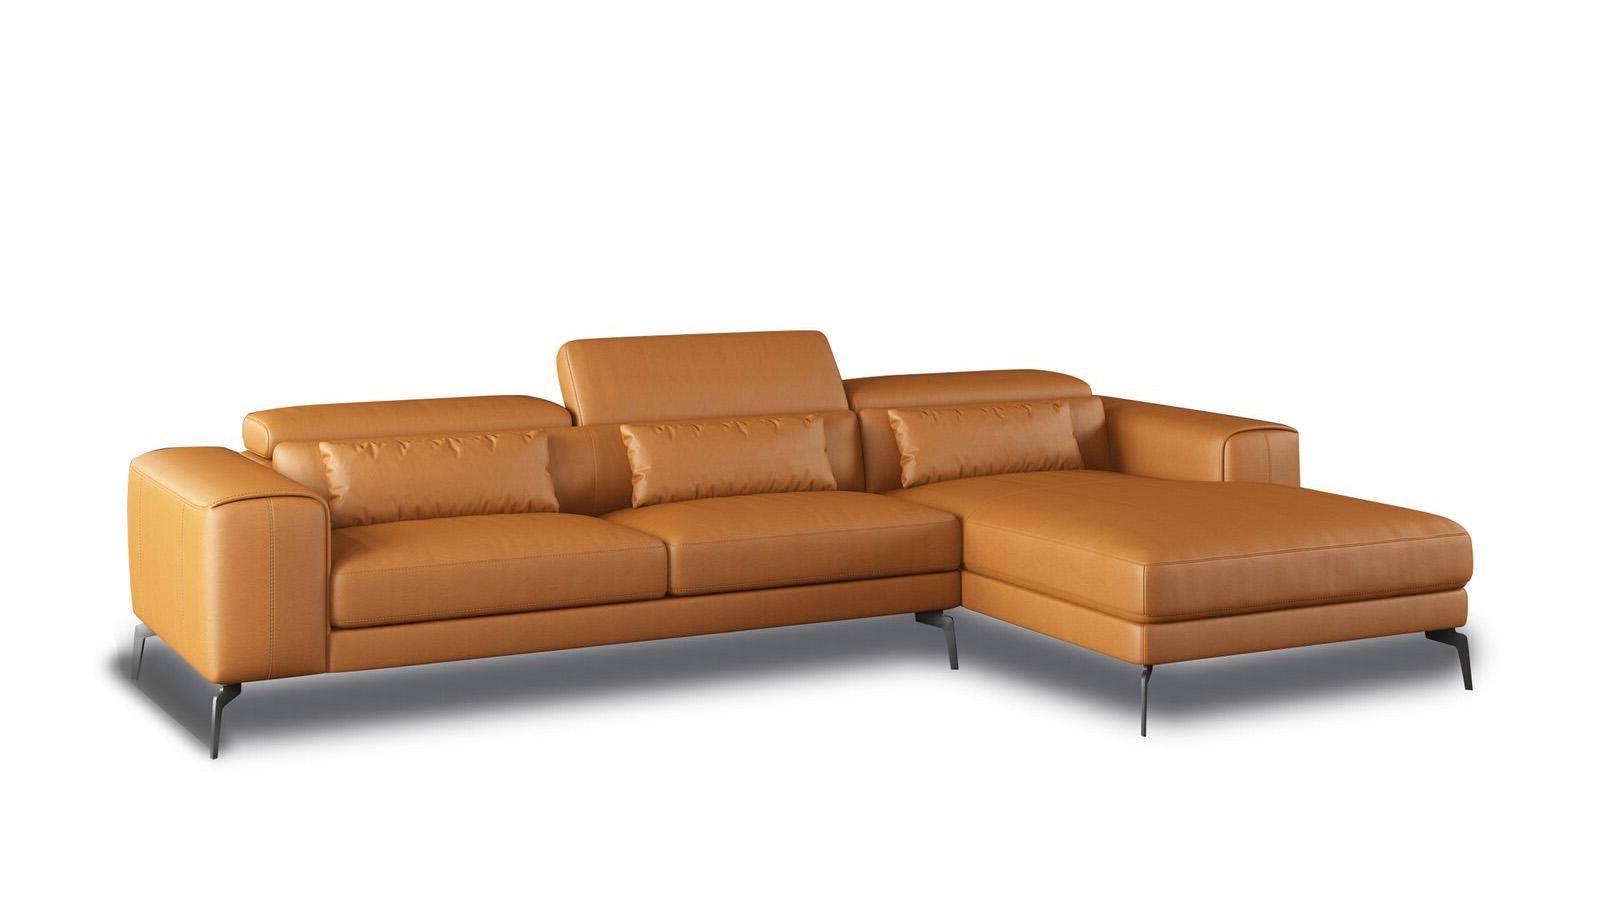 Contemporary, Modern Sectional Sofa CAVOUR EF-12556R-3RHF in Cognac Leather